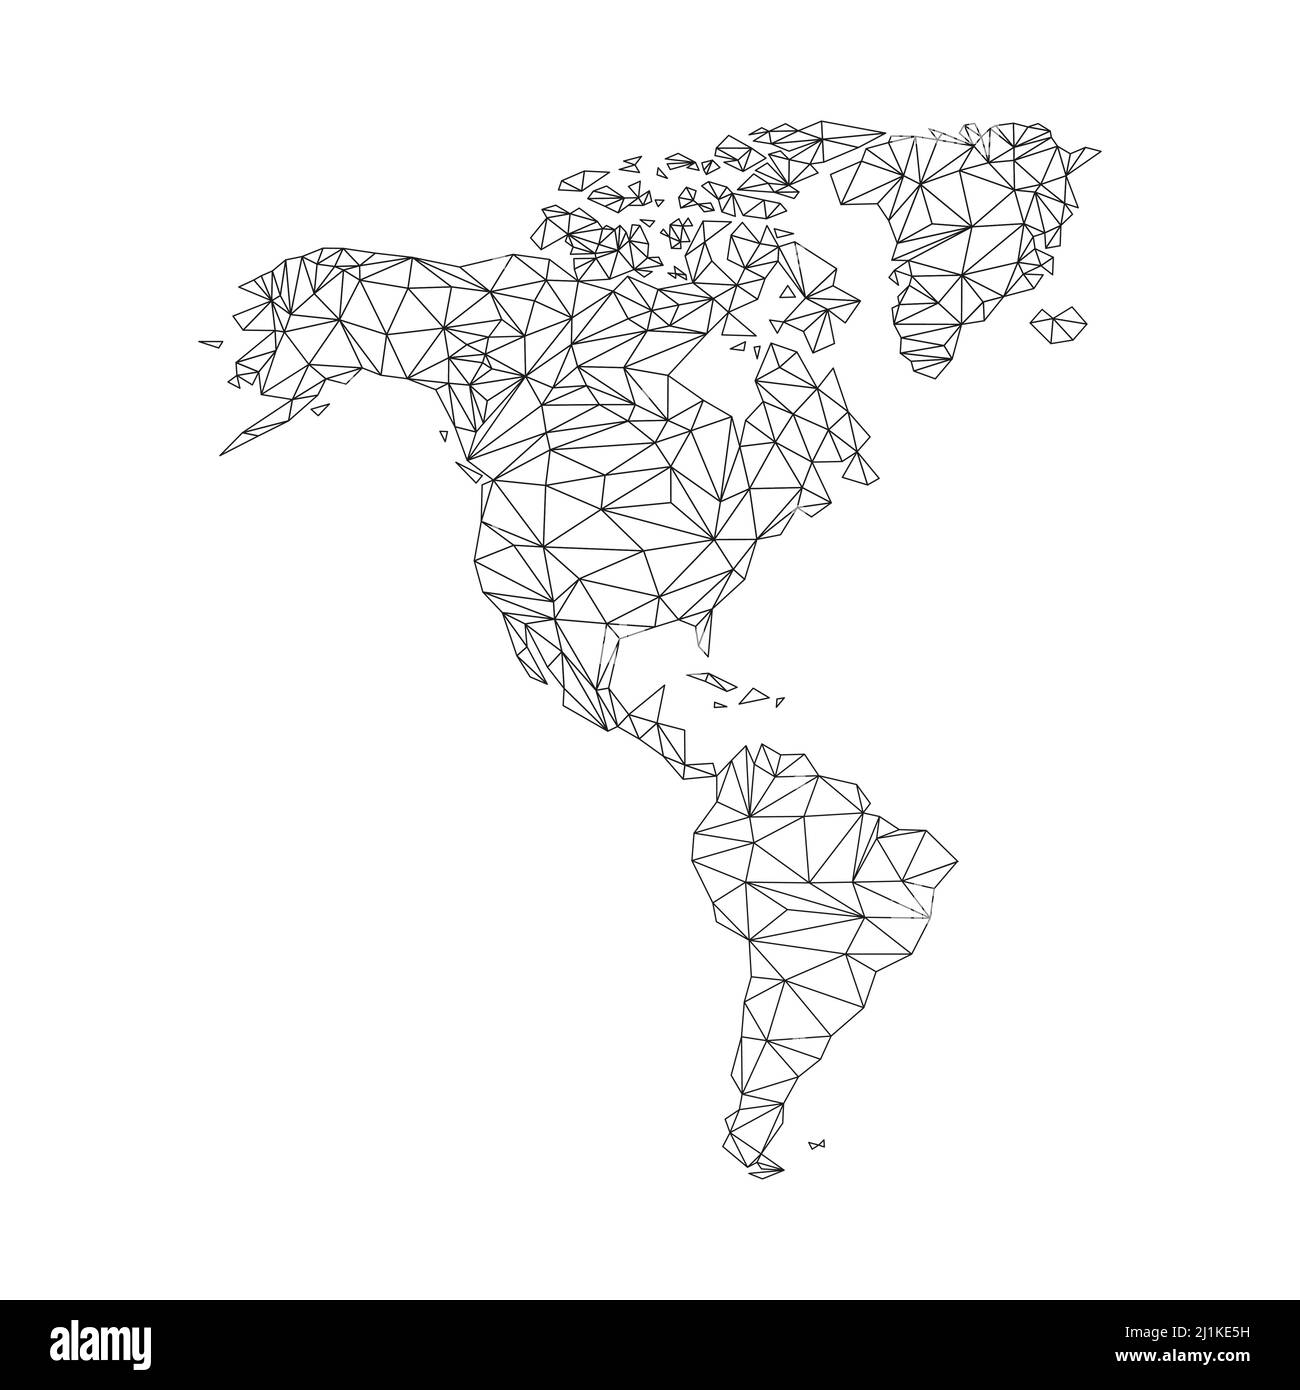 North and South America map. World map with triangular shapes. Stock Vector